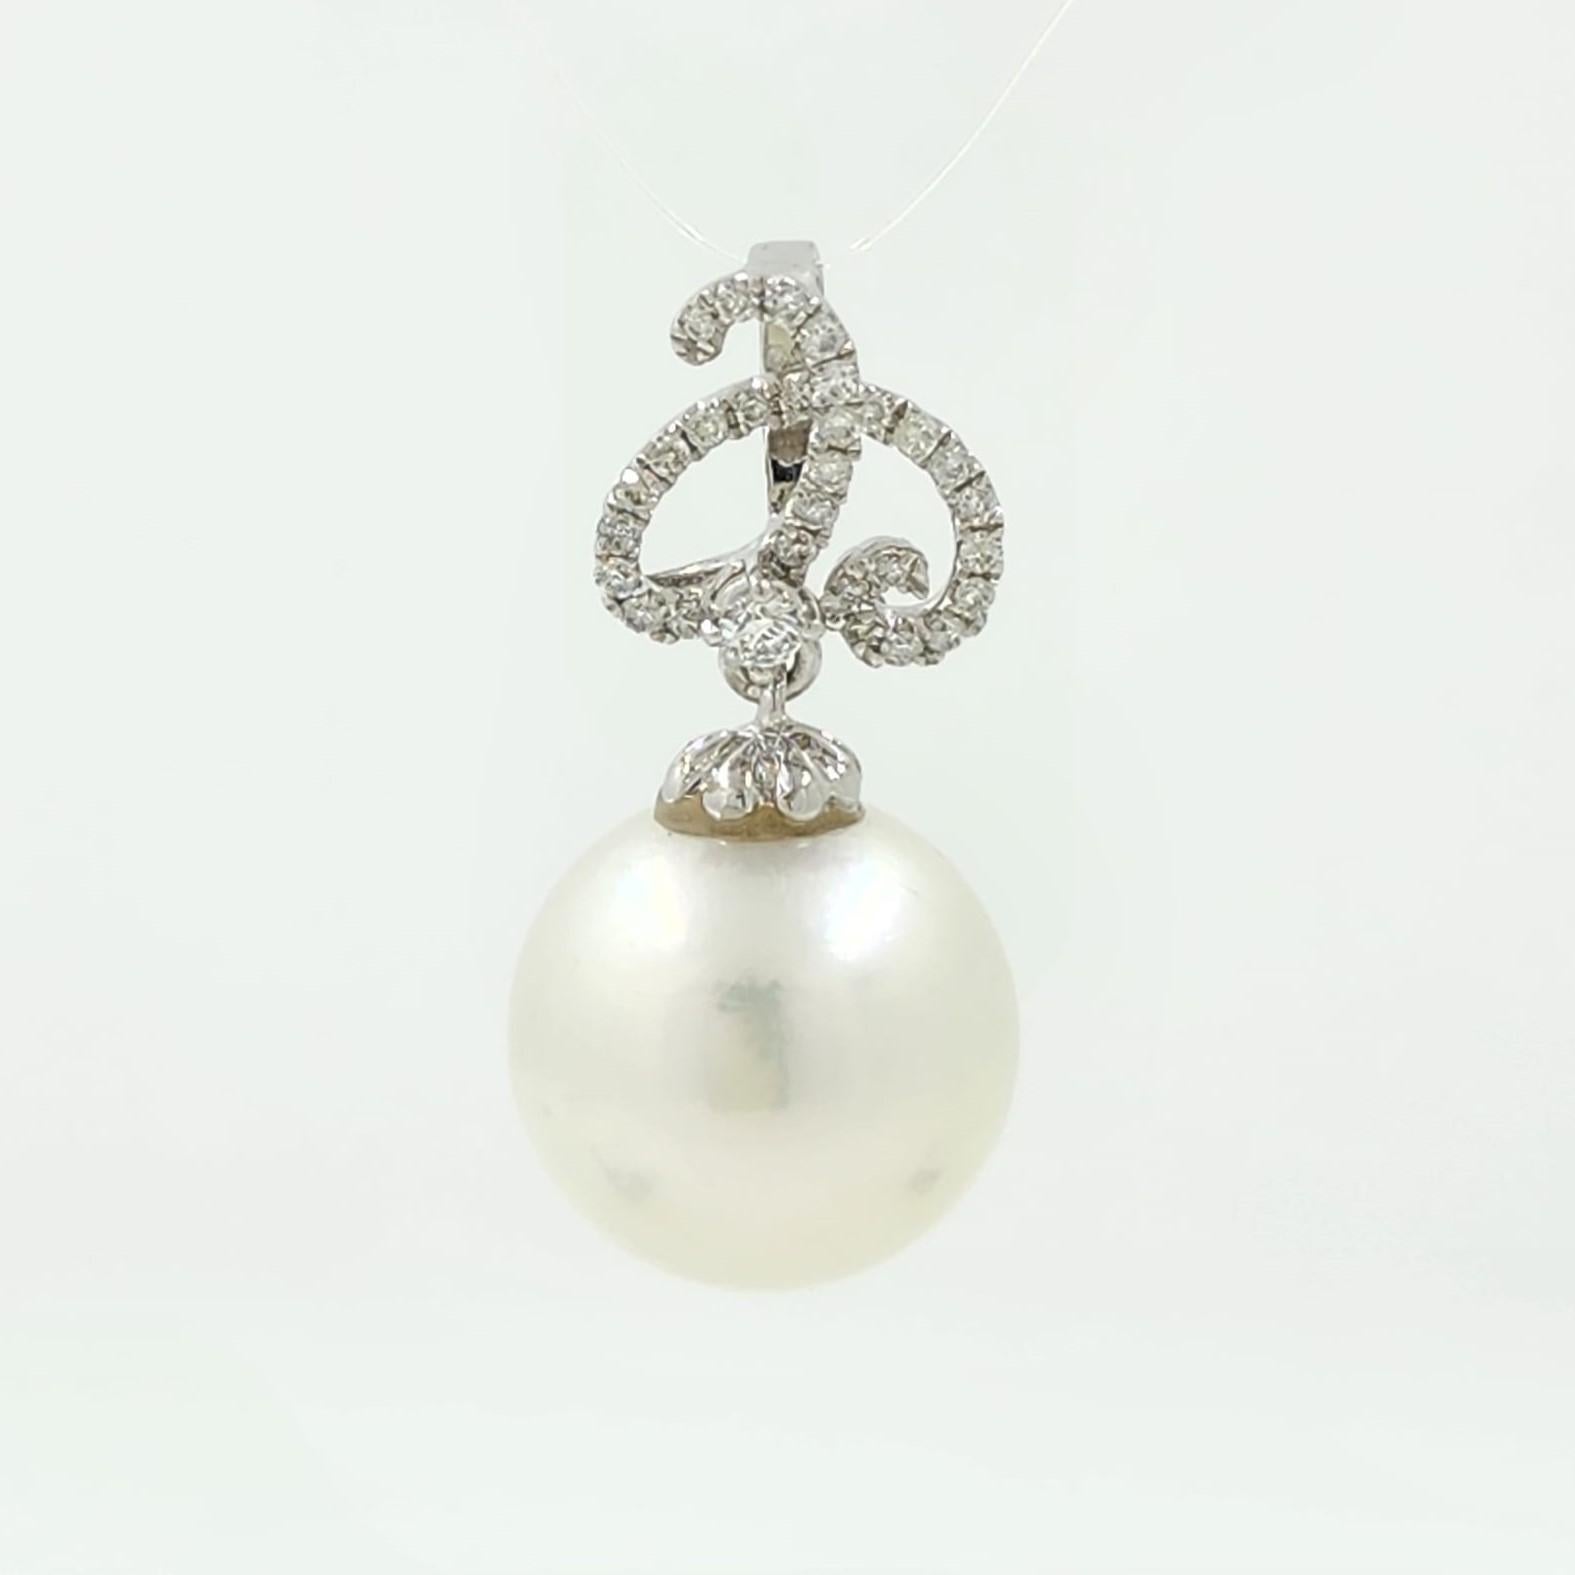 The 18K White Gold South Sea Pearl and Diamond Pendant is a stunning piece of jewelry that exudes sophistication and luxury. Its centerpiece is a beautiful 12.5mm South Sea pearl, known for its lustrous glow and captivating charm.

The pearl is